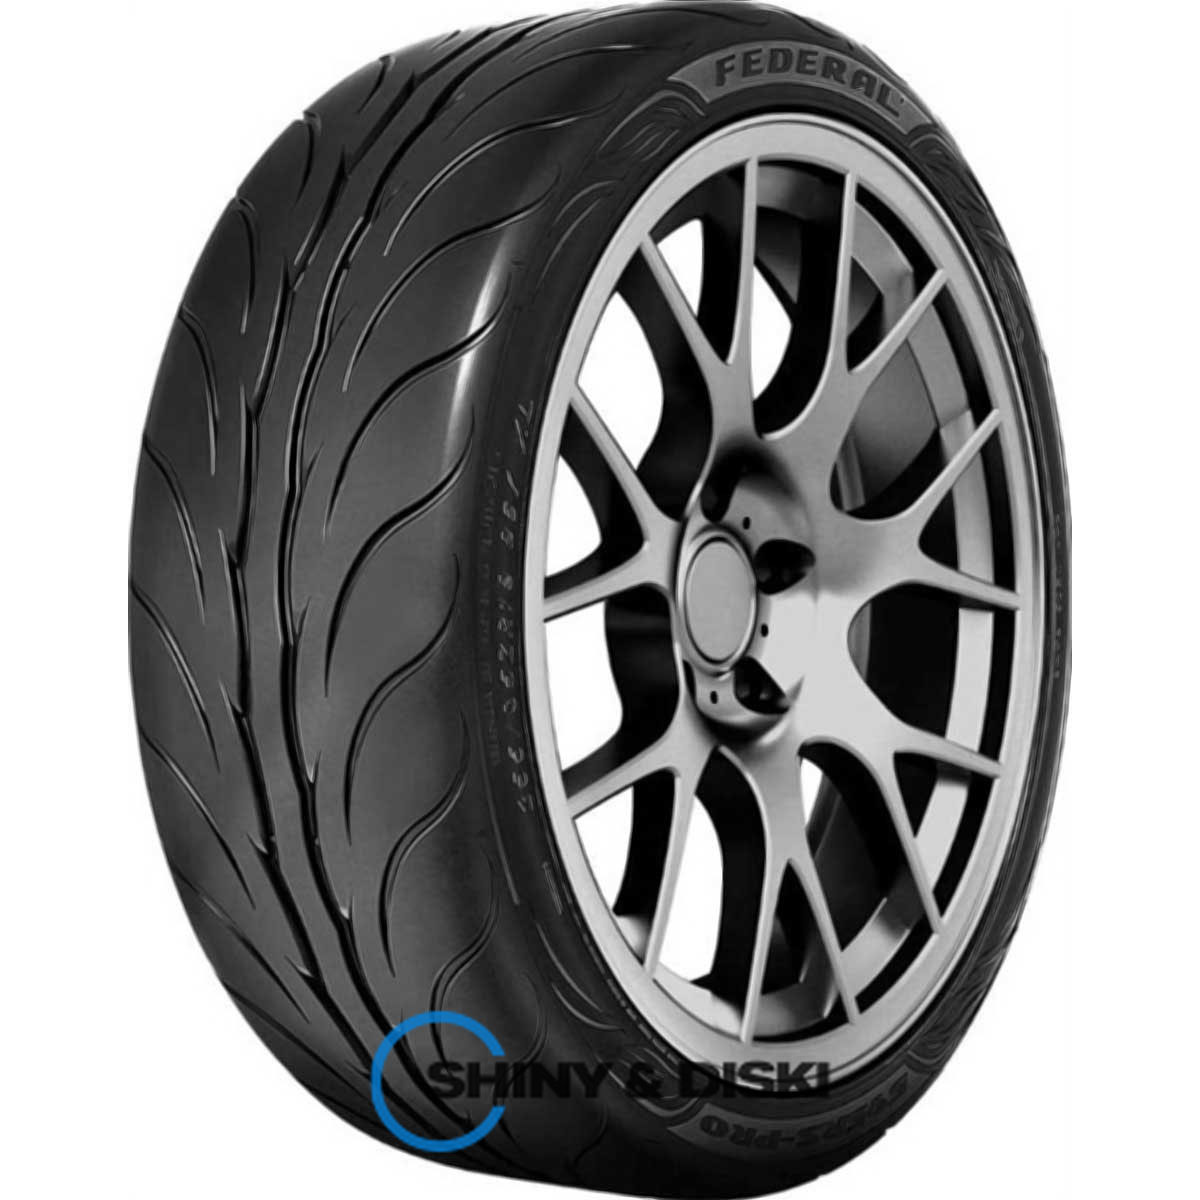 federal extreme performance 595 rs-pro 195/50 r15 86w xl